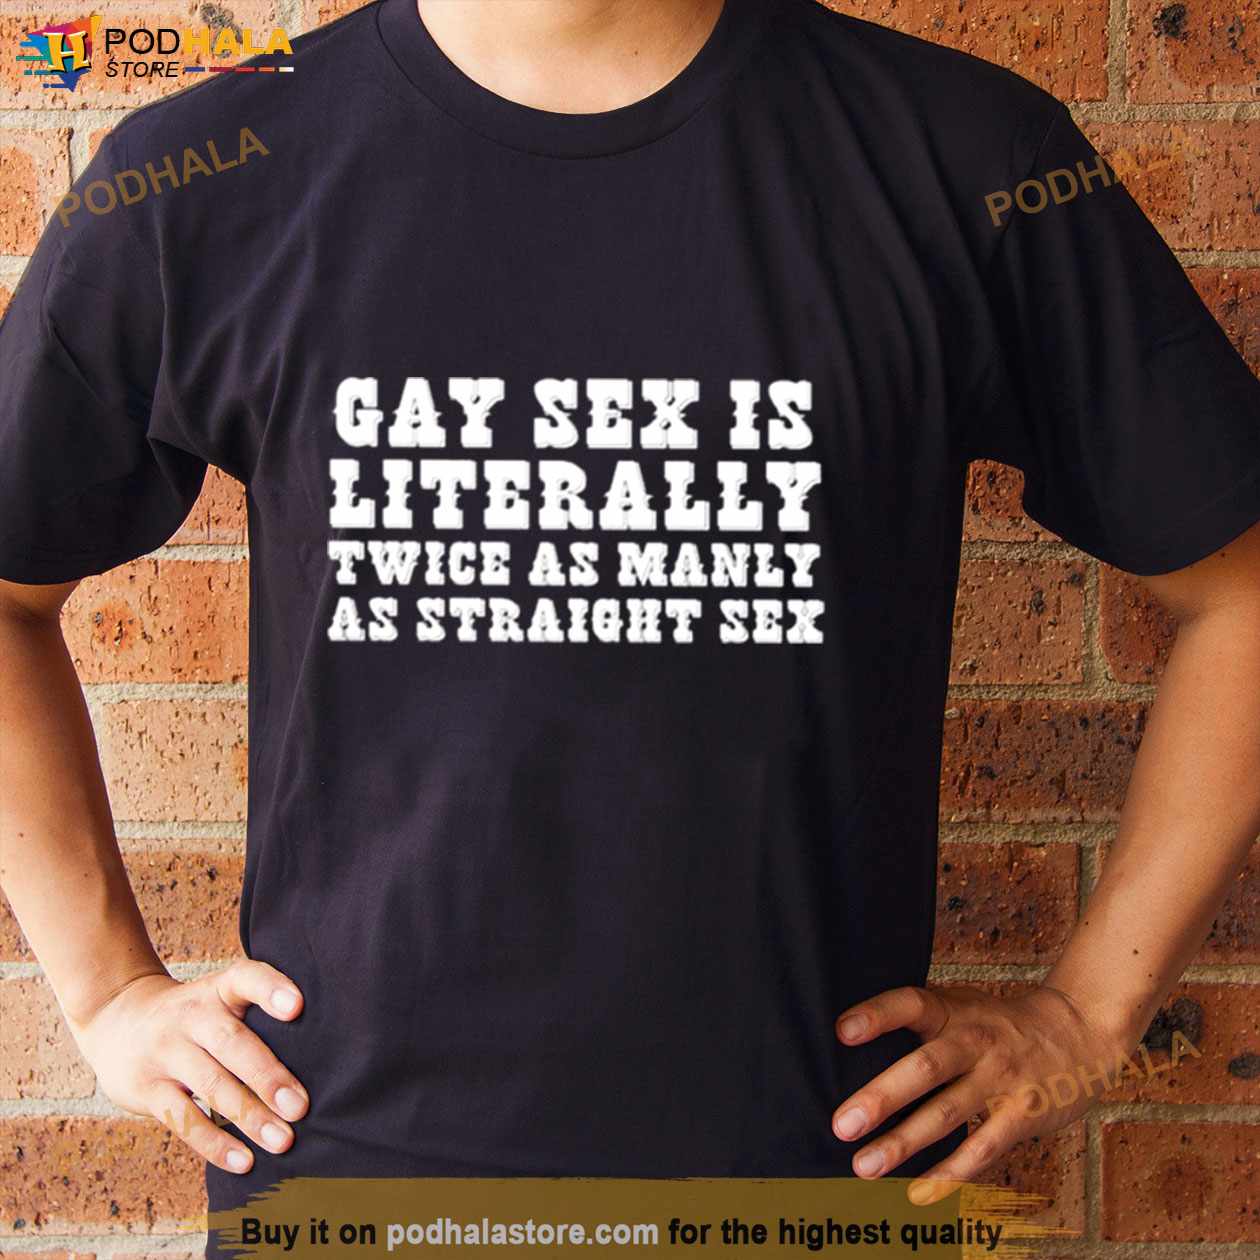 Gay Sex Is Literally Twice As Manly As Straight Sex Shirt image photo